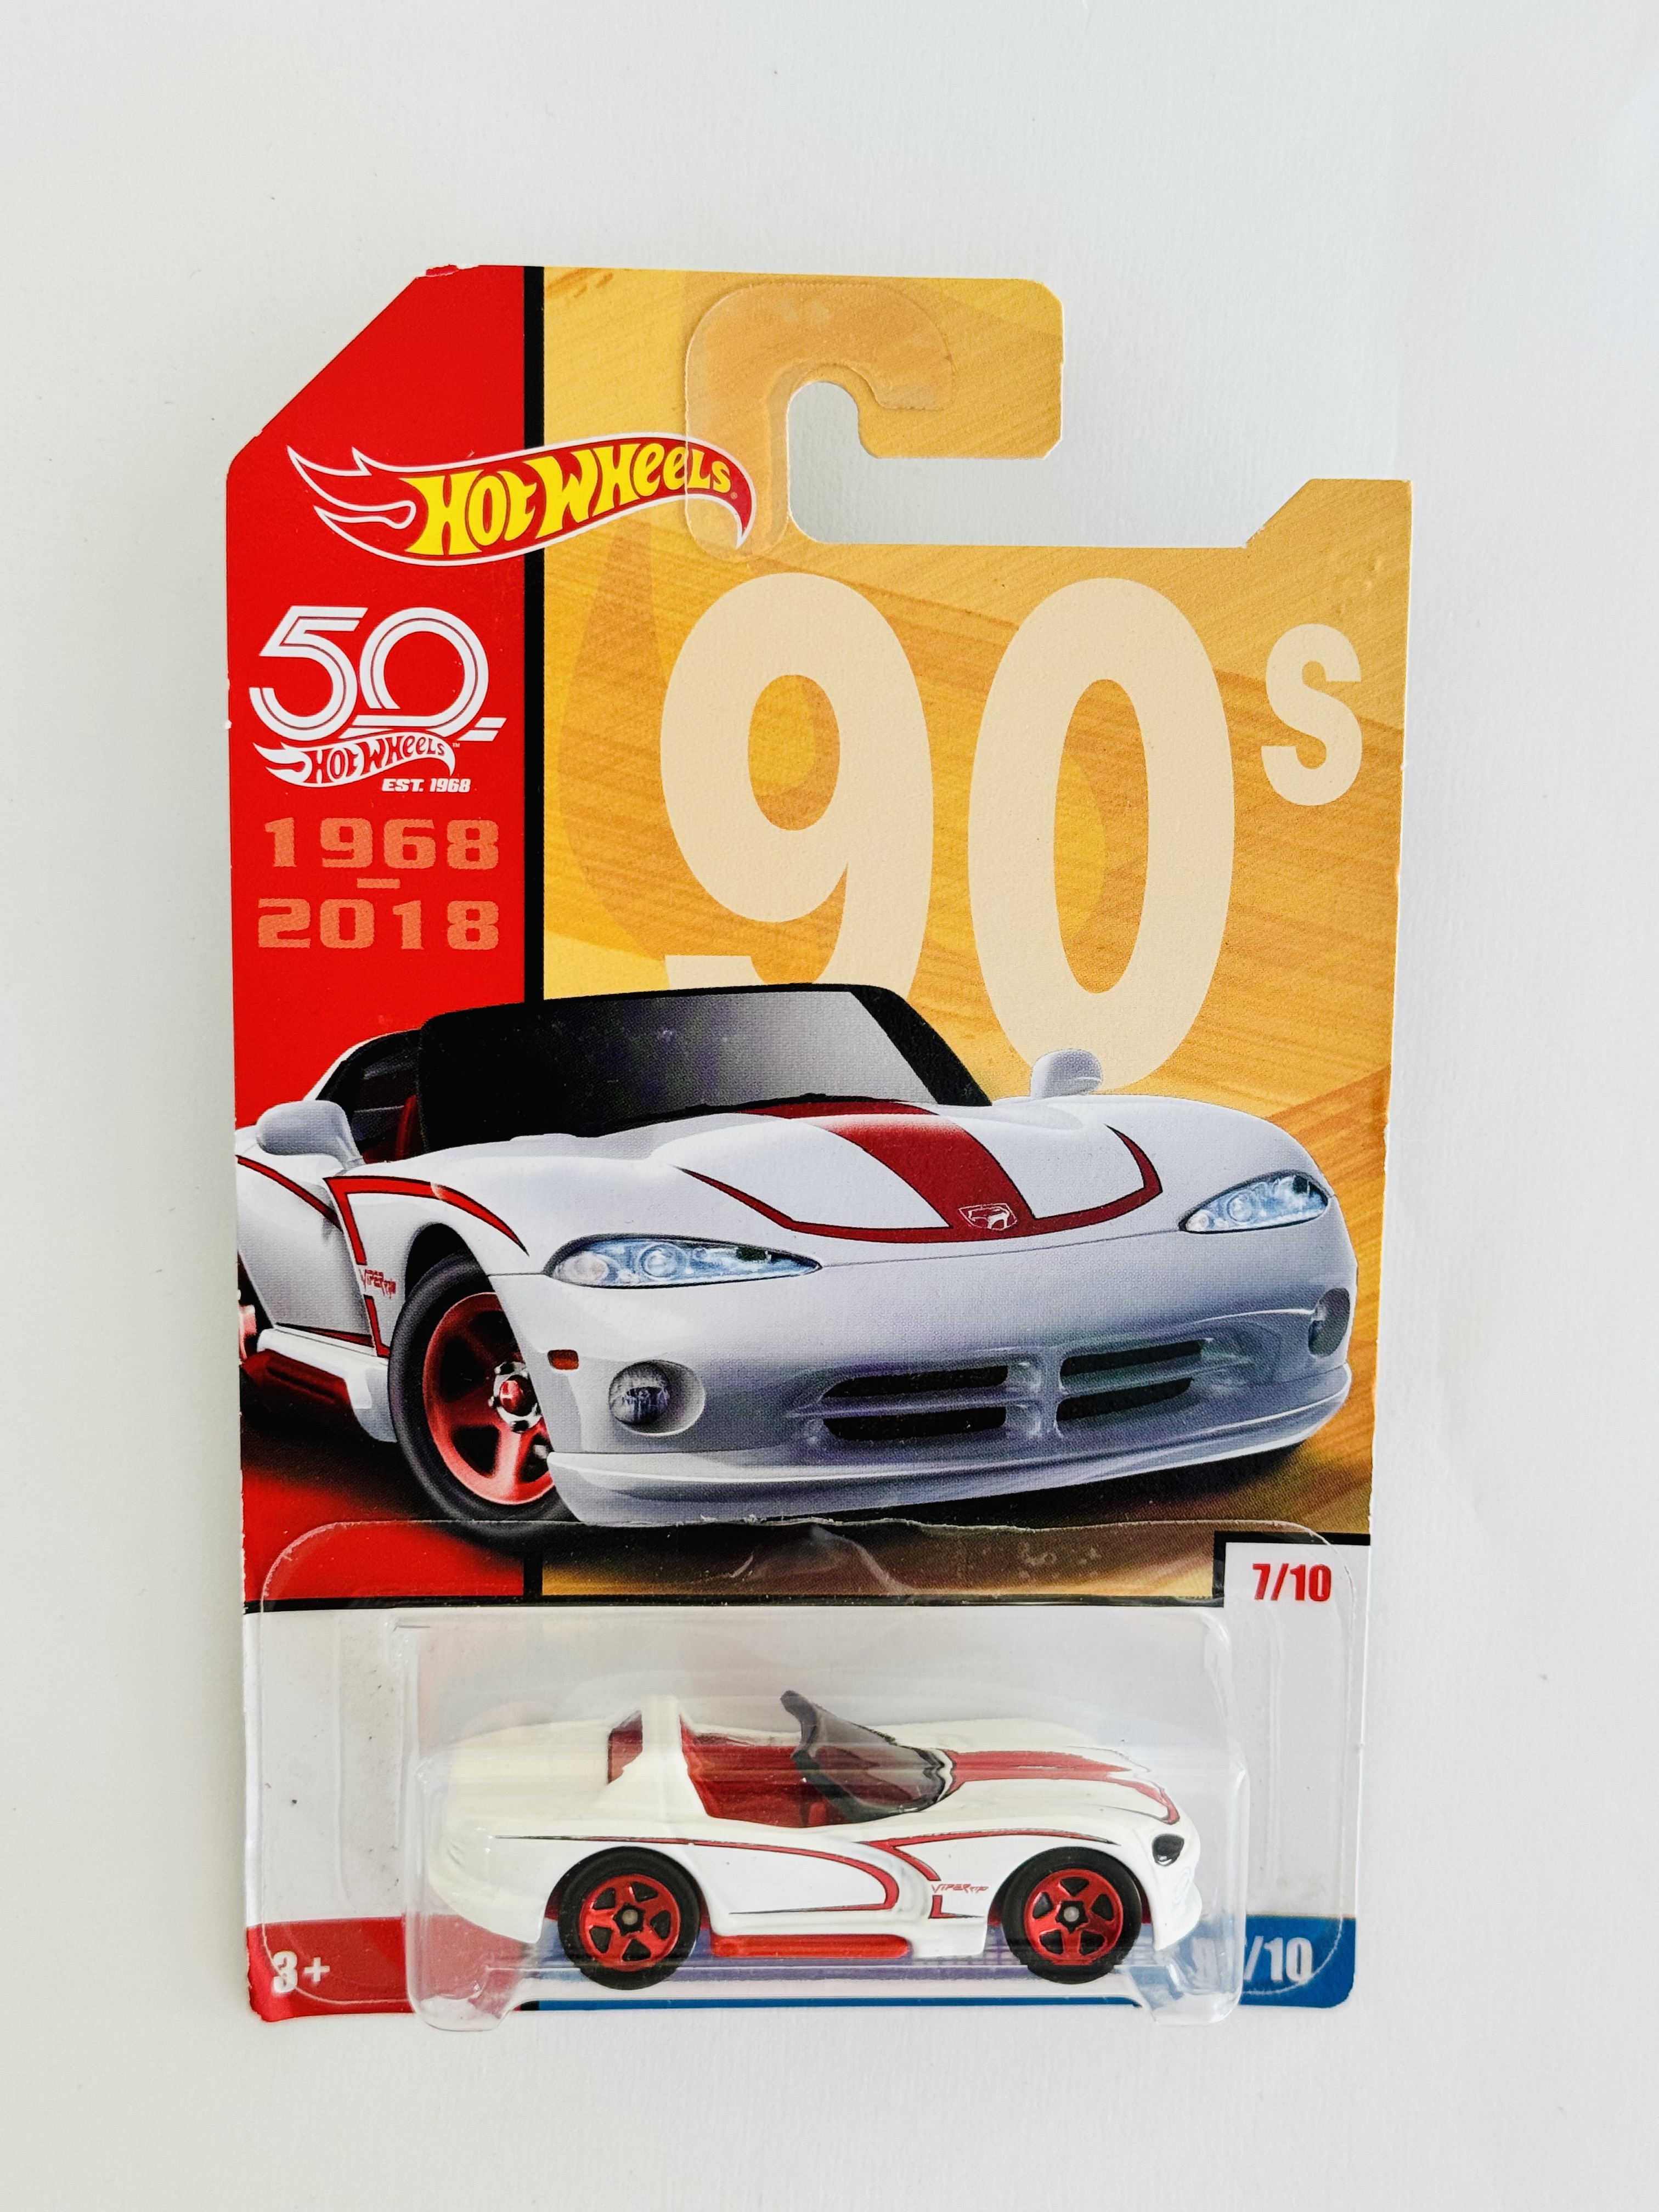 Hot Wheels Throwback Dodge Viper RT/10 - Target Exclusive